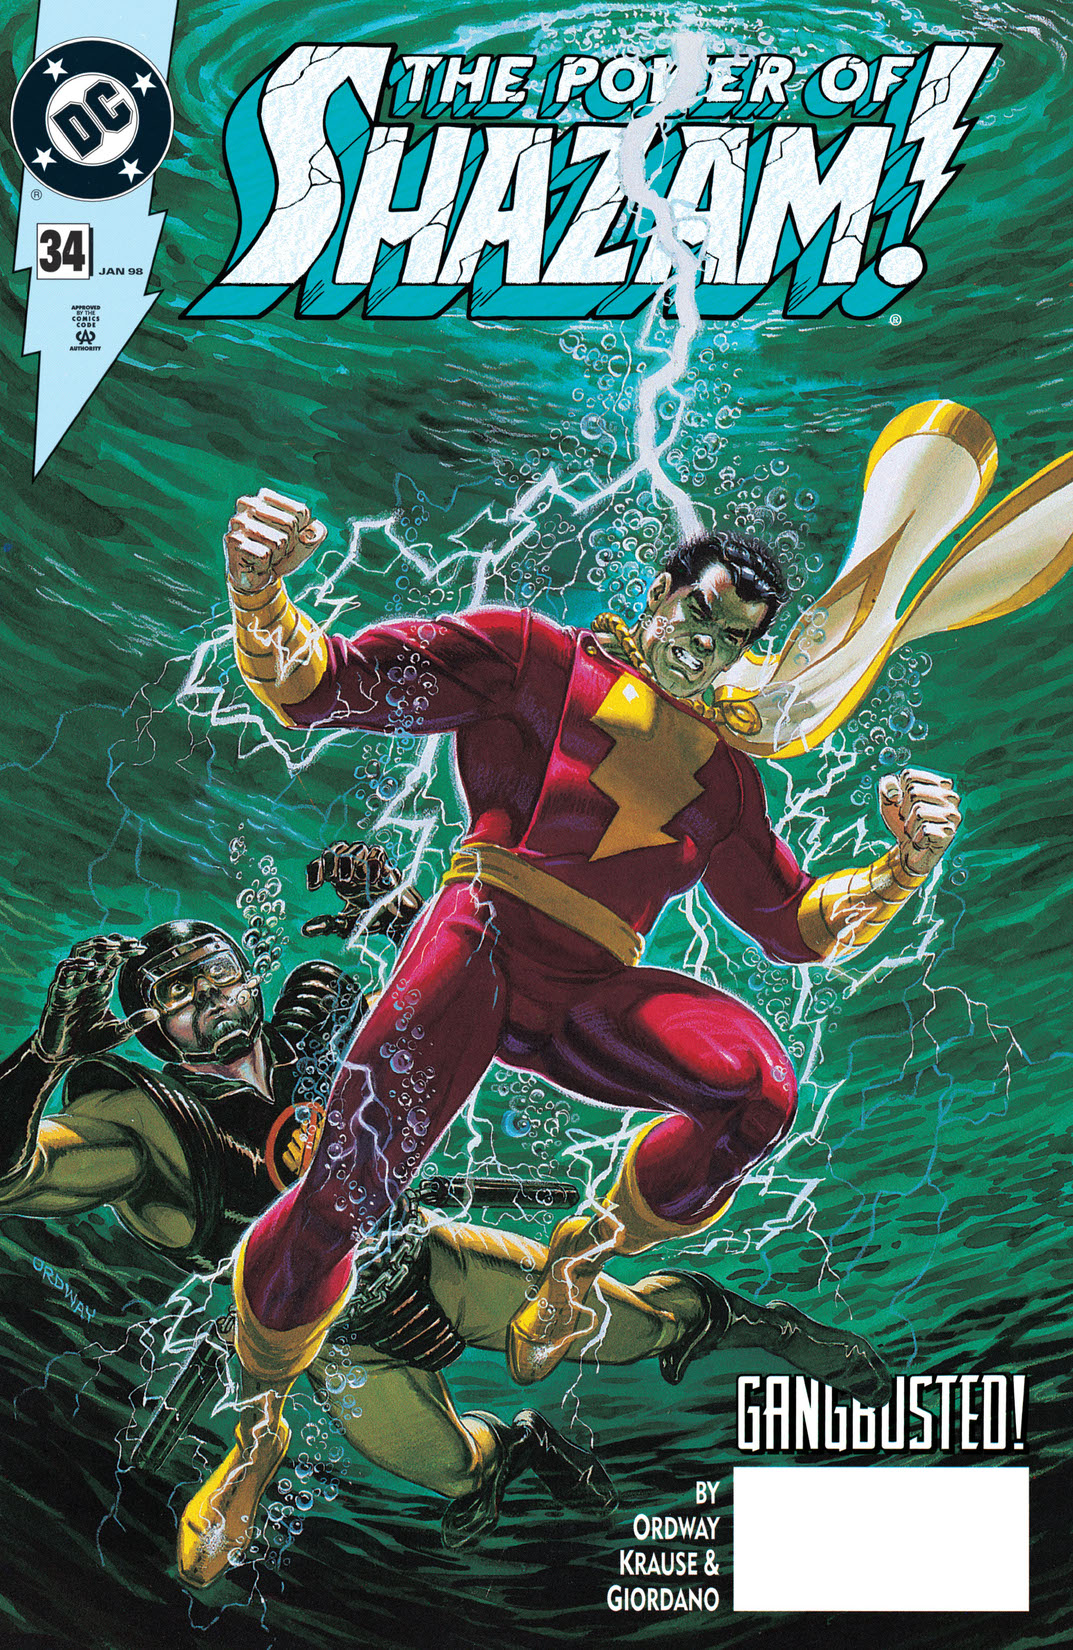 The Power of Shazam! #34 preview images